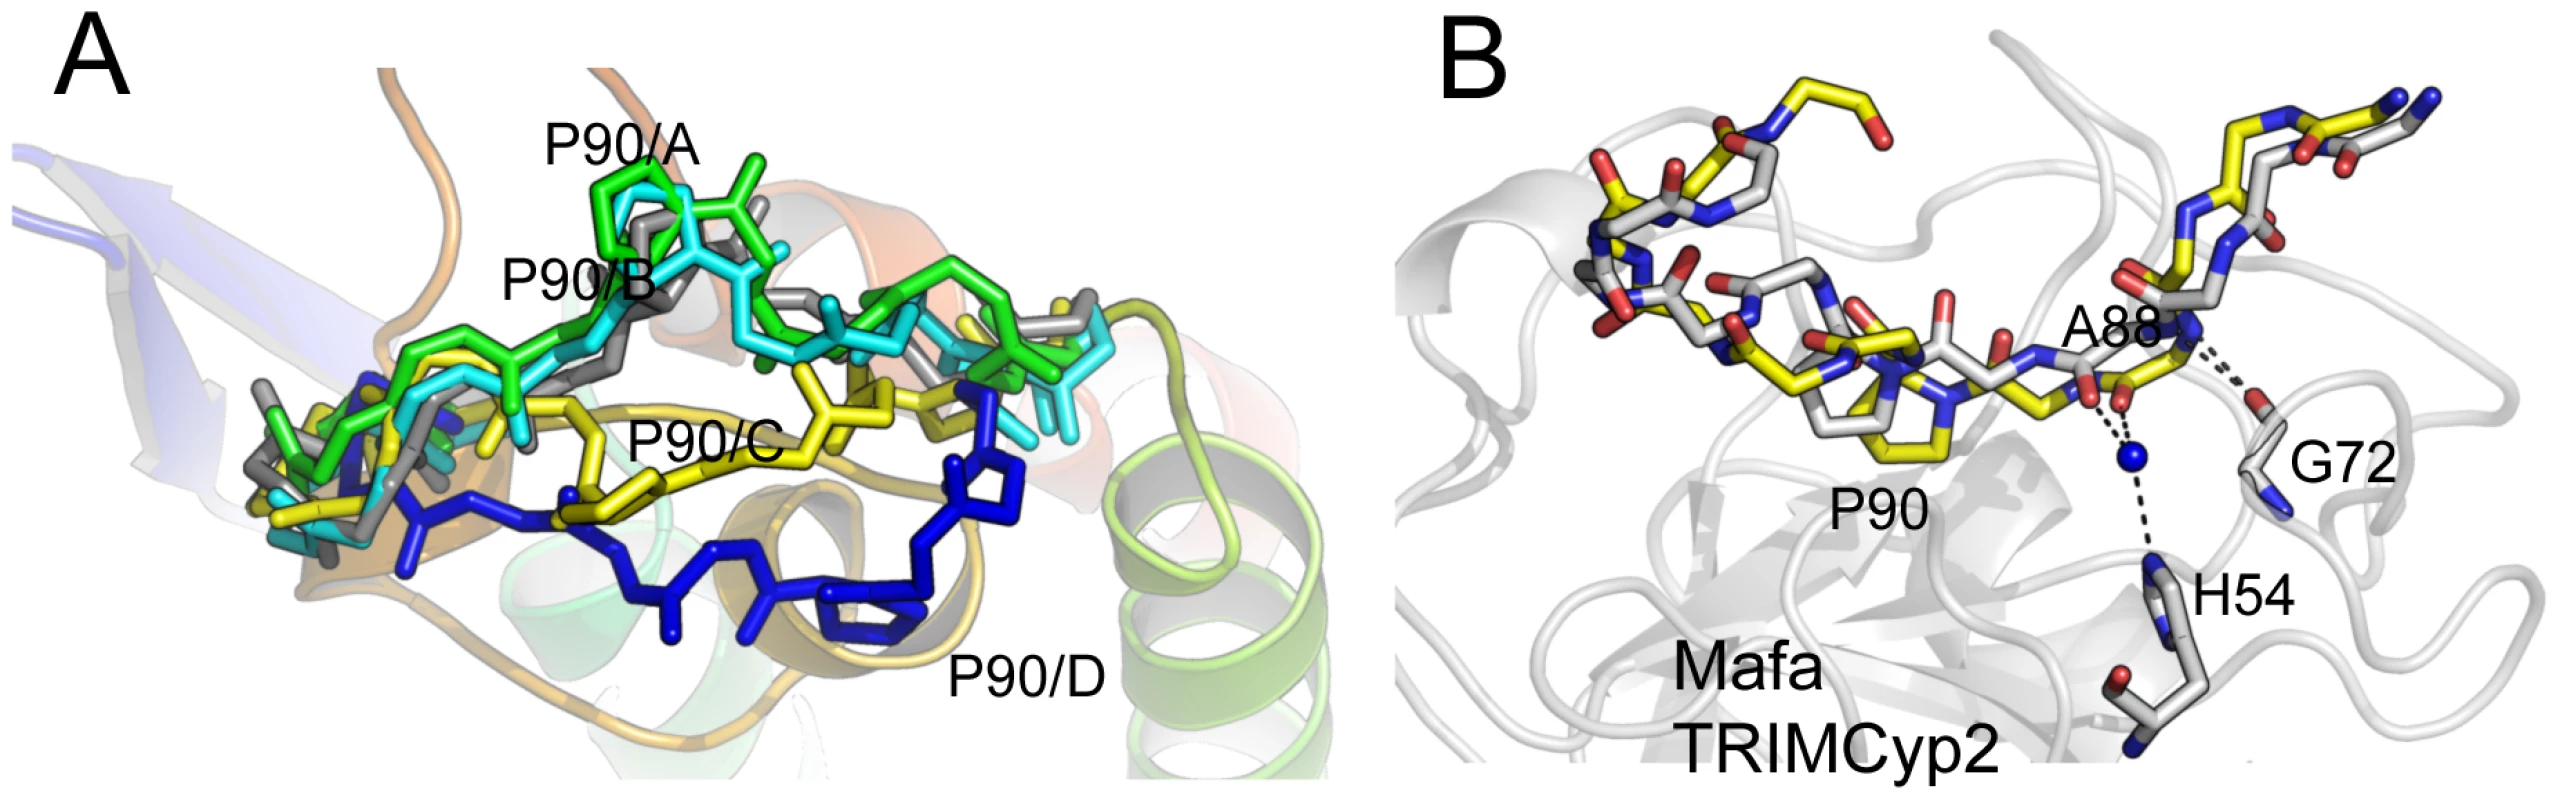 CypA-binding loop conformations in the HIV2 +A88 capsid structure.